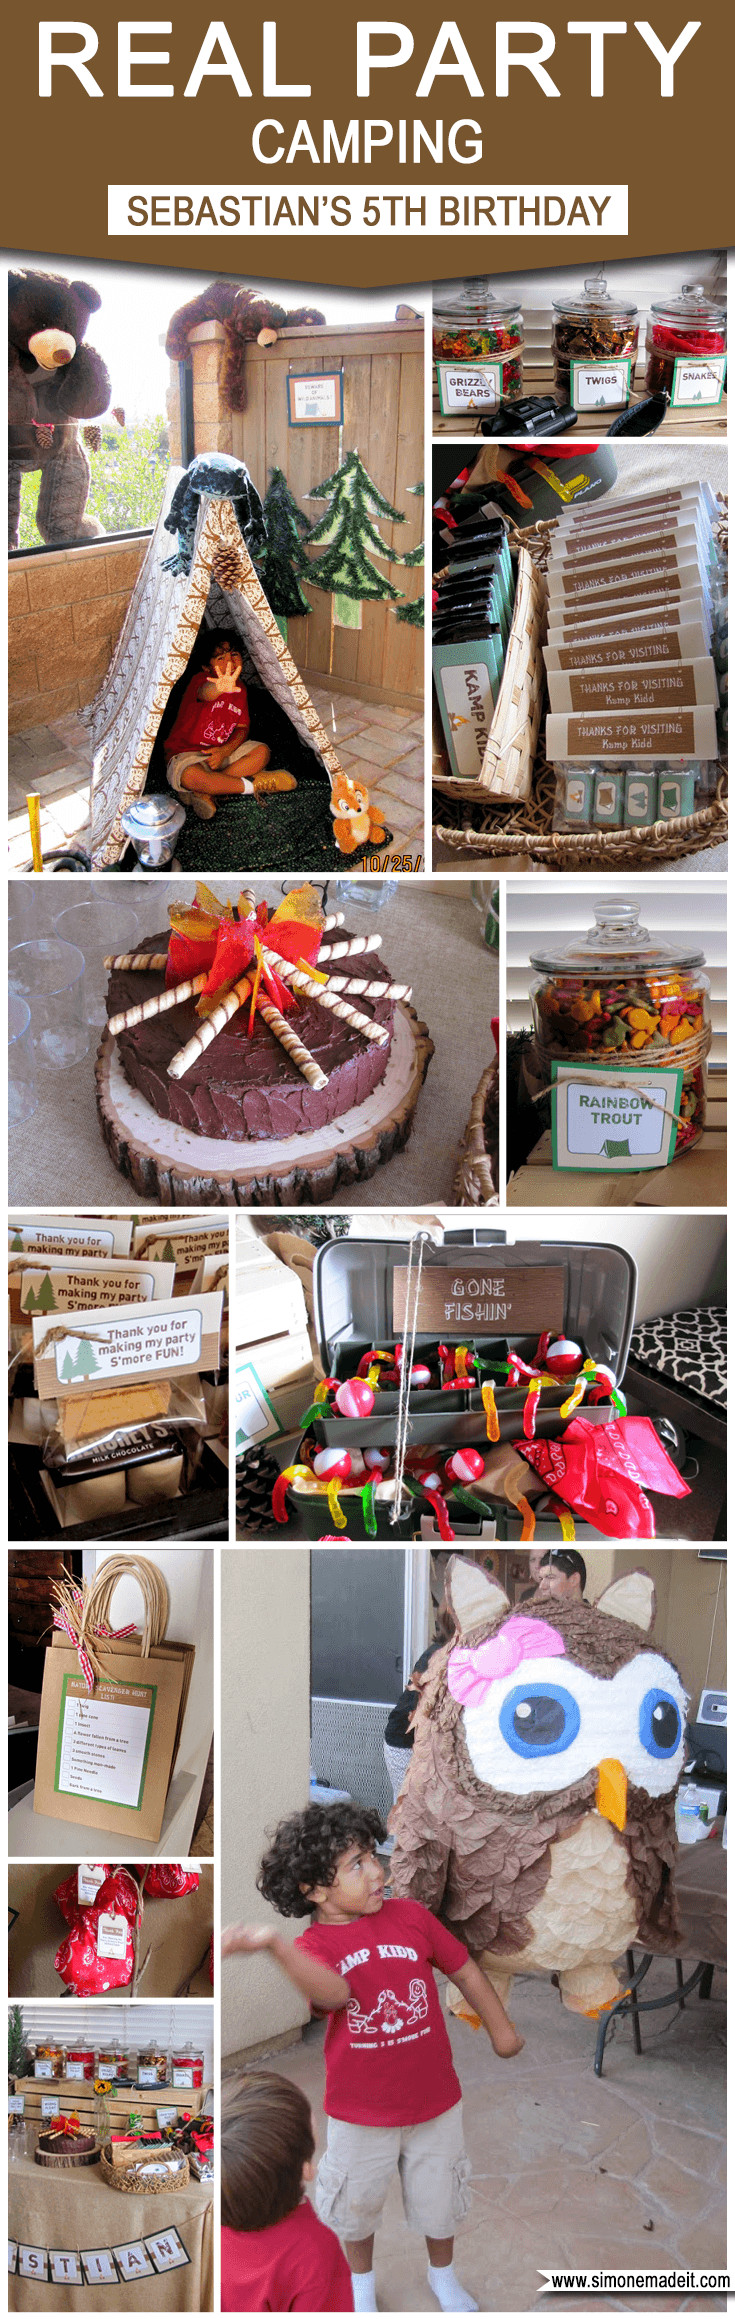 Camping Themed Birthday Party
 Camping Birthday Party Theme